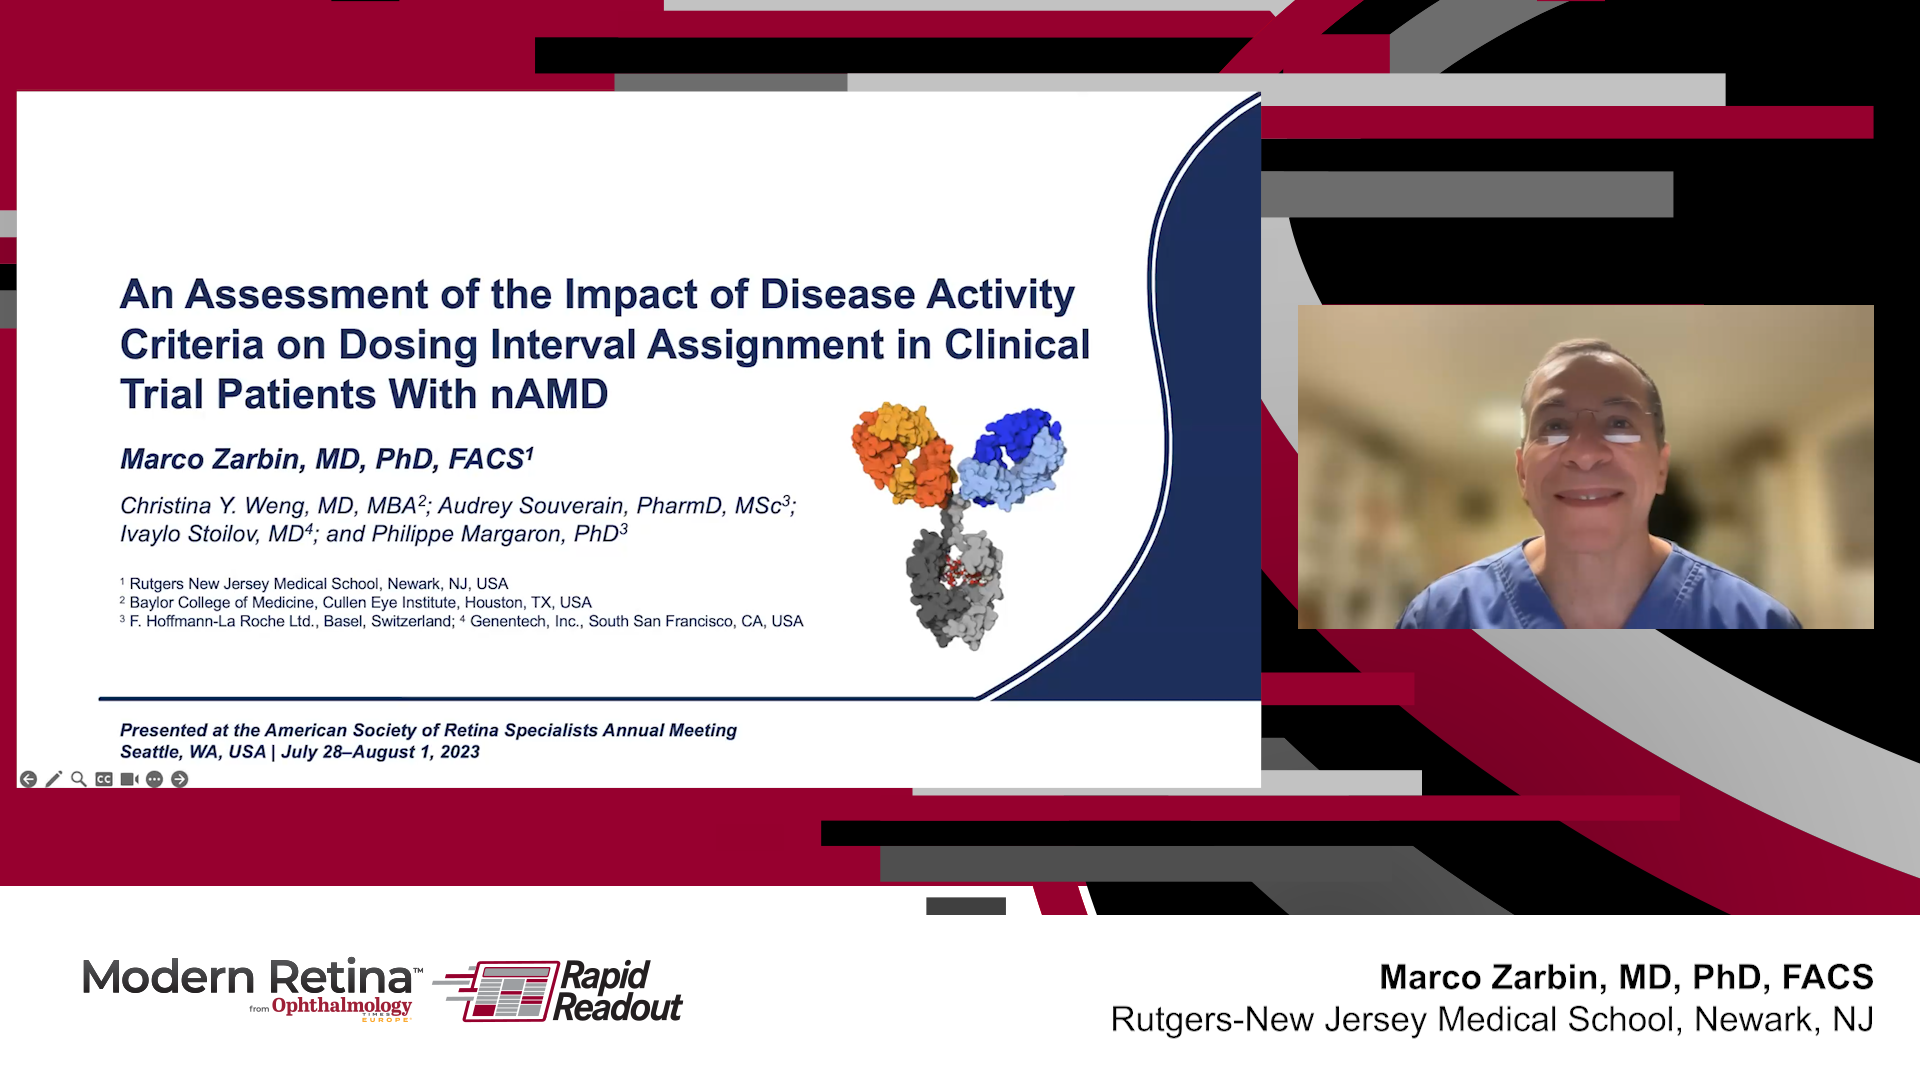 Impact of Disease Activity Criteria on Dosing Interval Assignment in Clinical Trials in nAMD